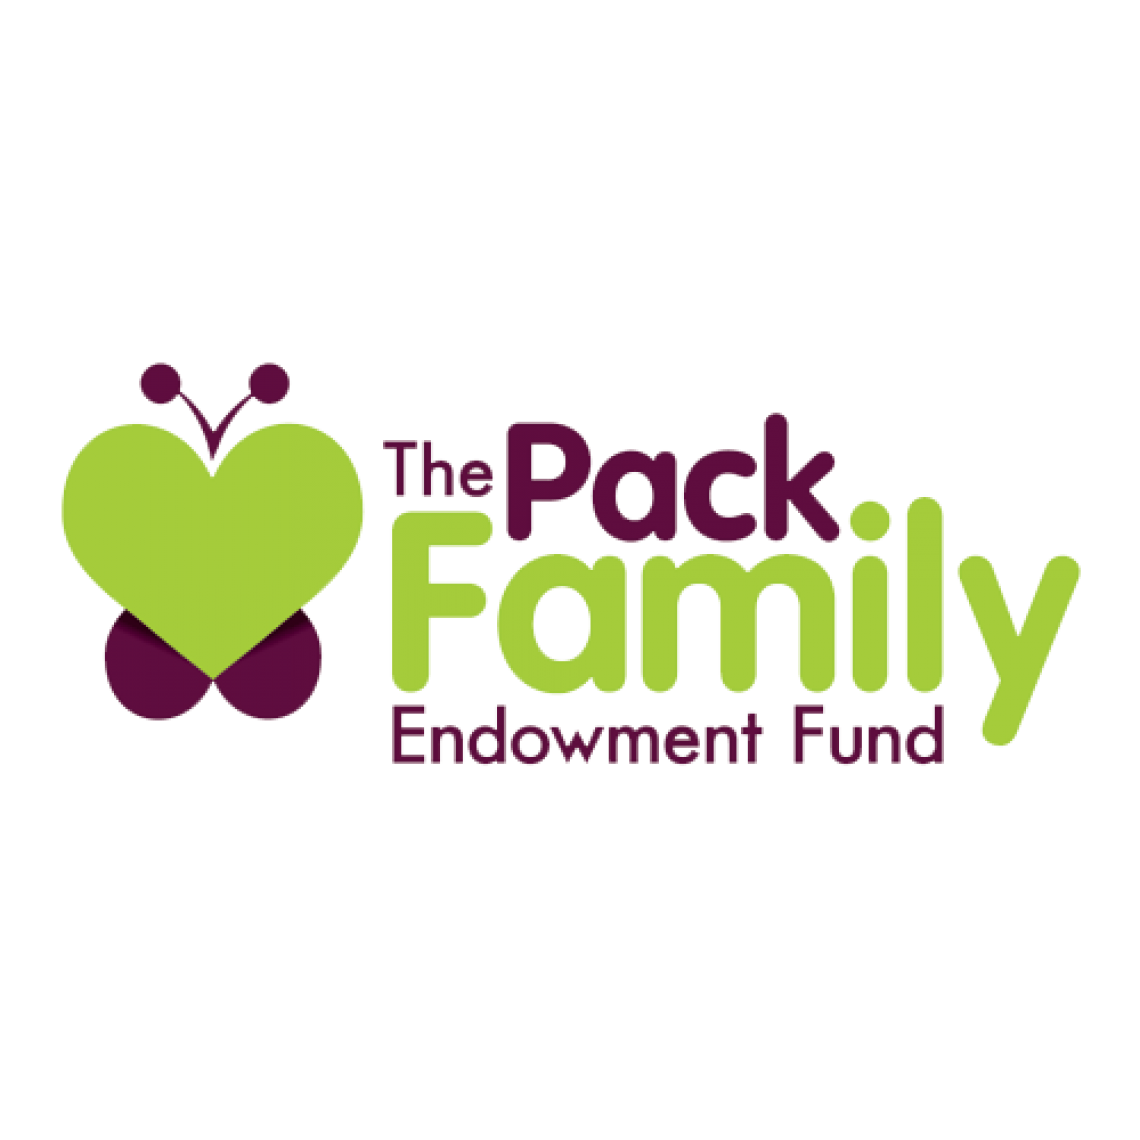 The Pack Family Endowment Fund logo